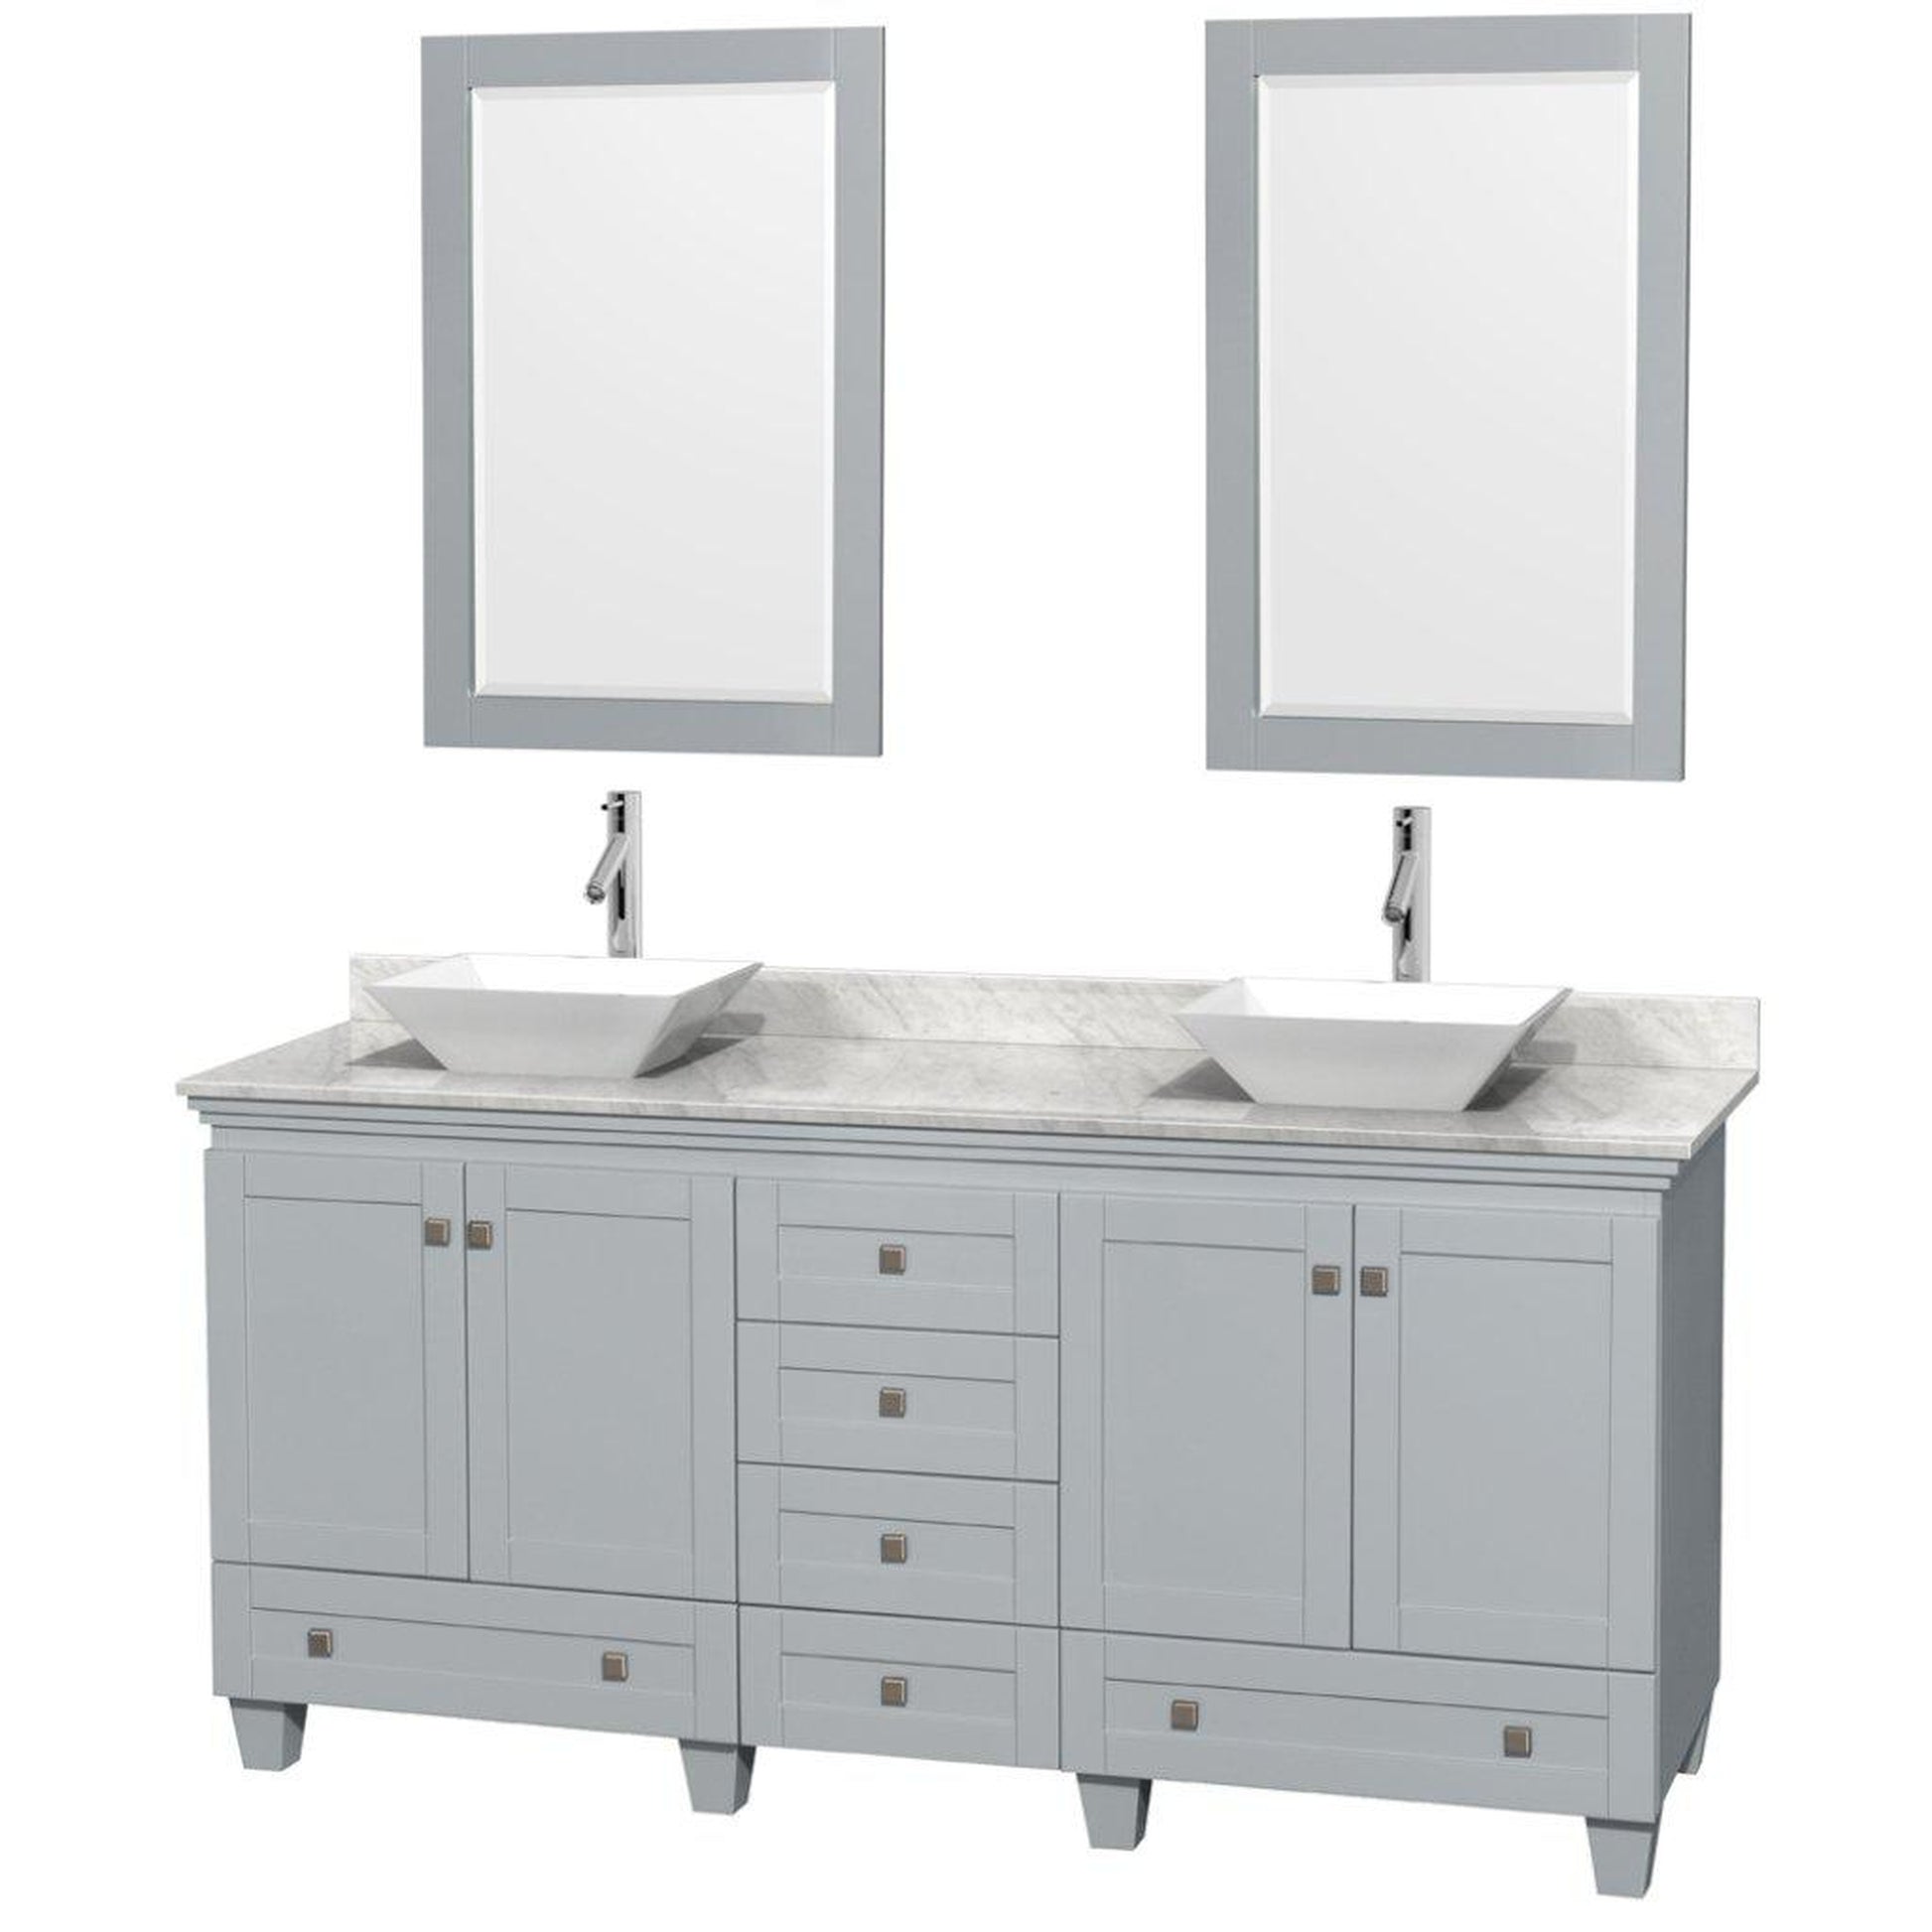 Wyndham Collection Acclaim 72" Double Bathroom Oyster Gray Vanity With White Carrara Marble Countertop And Pyra White Porcelain Sinks And 2 Set Of 24" Mirror